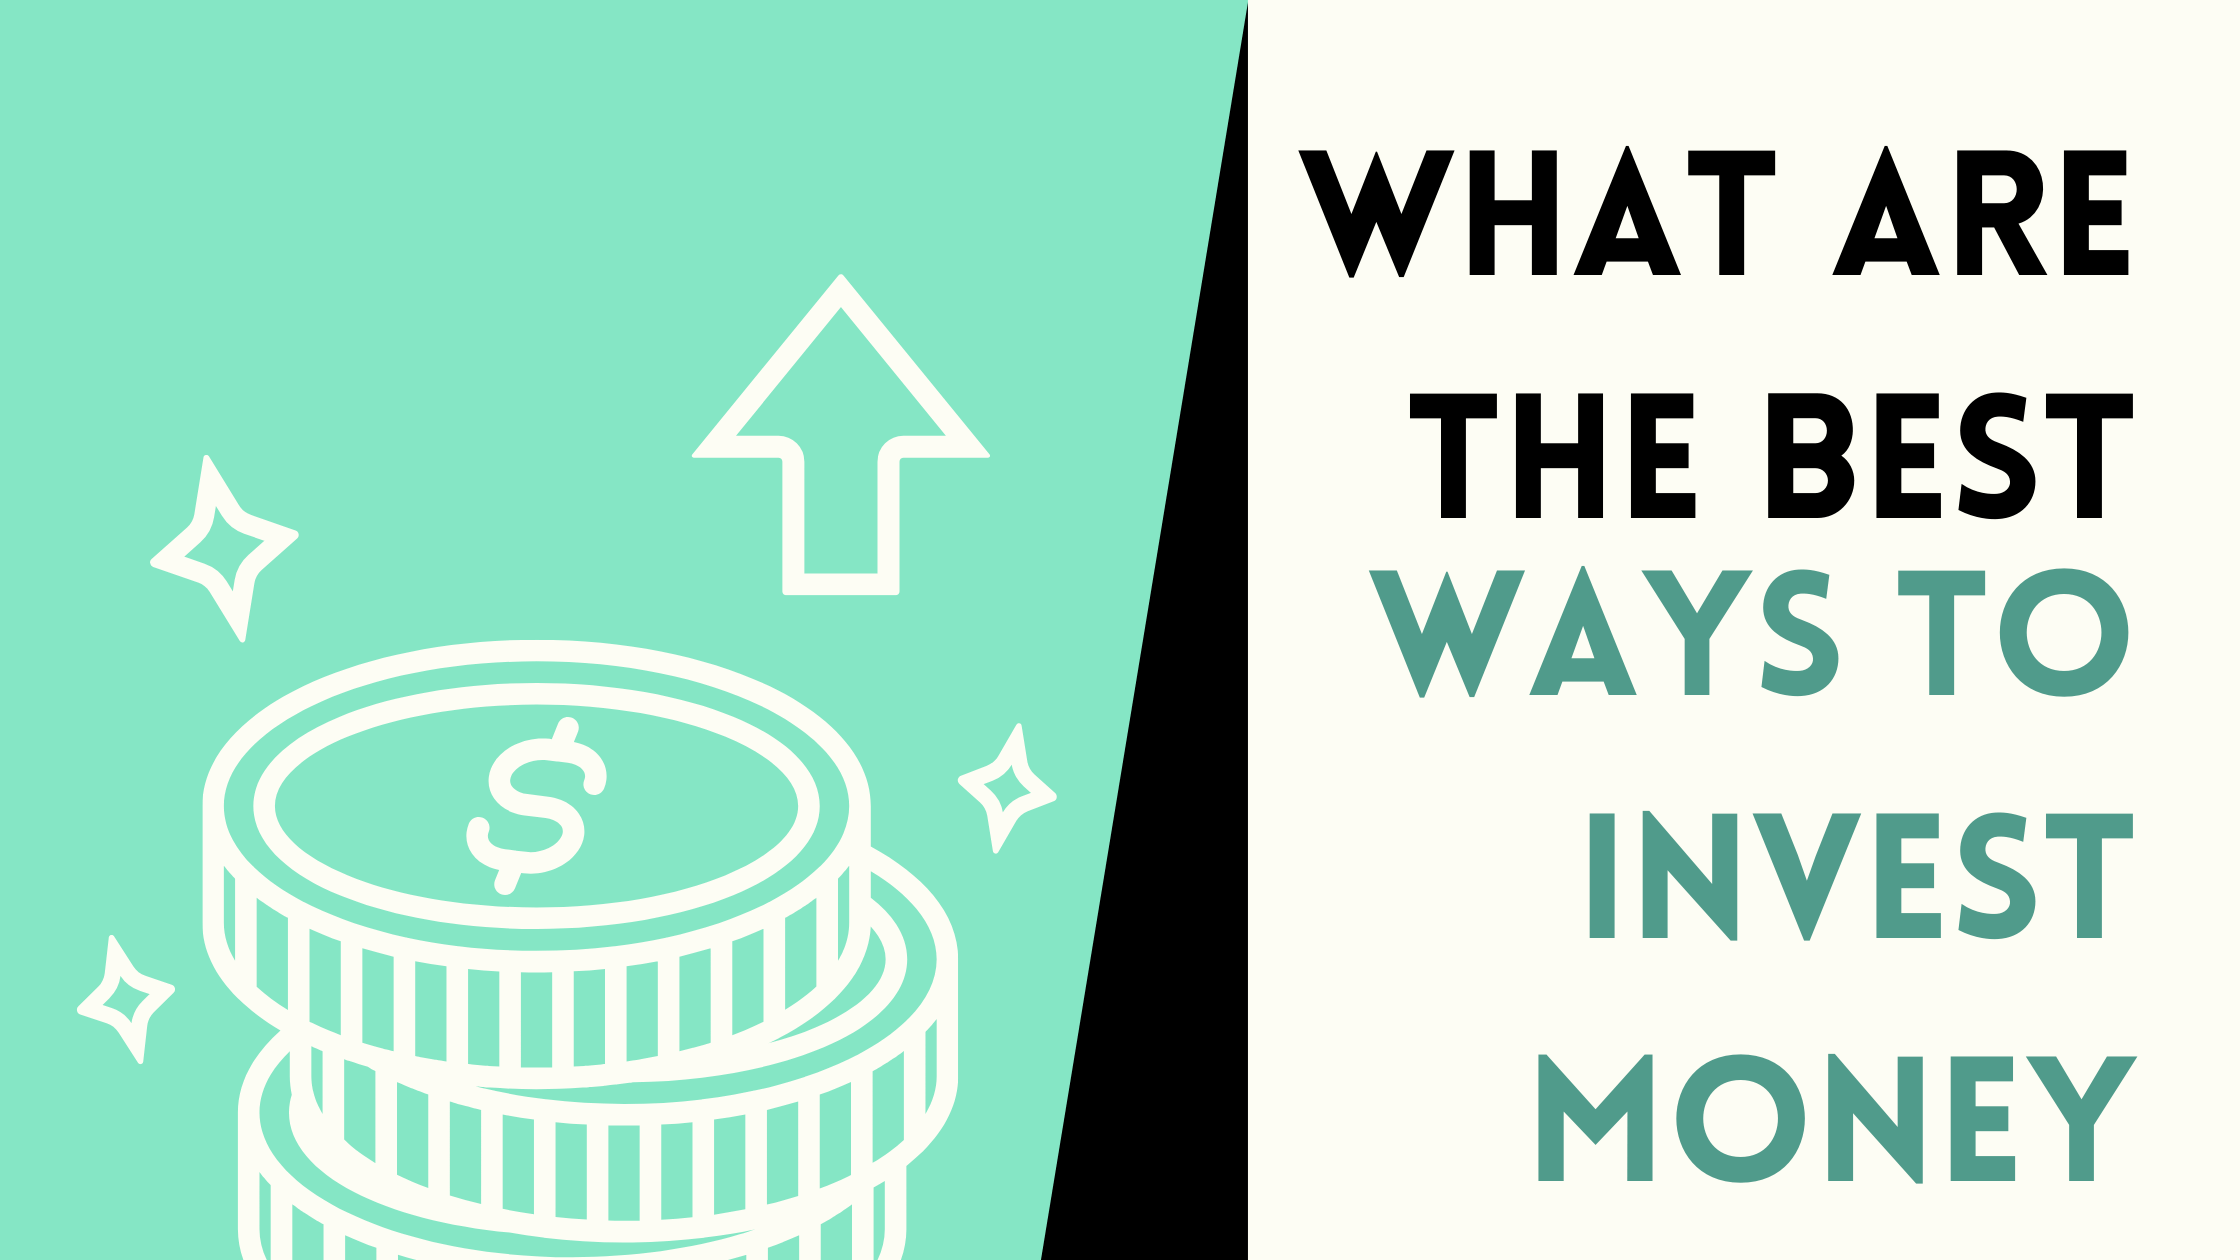 What are the Best Ways to Invest Money